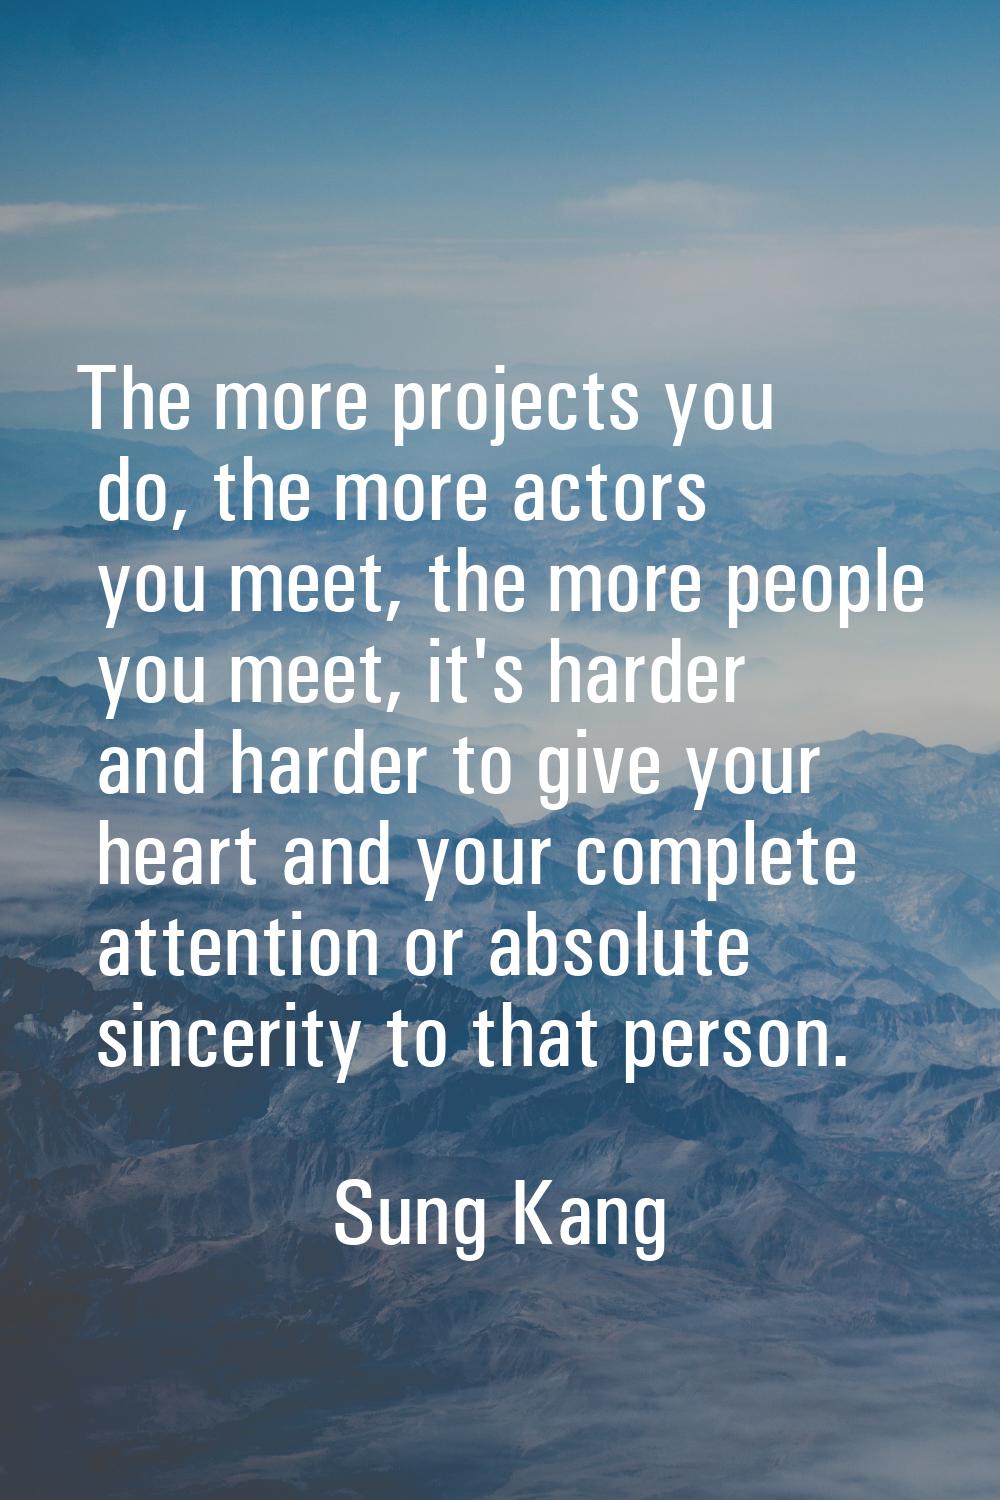 The more projects you do, the more actors you meet, the more people you meet, it's harder and harde